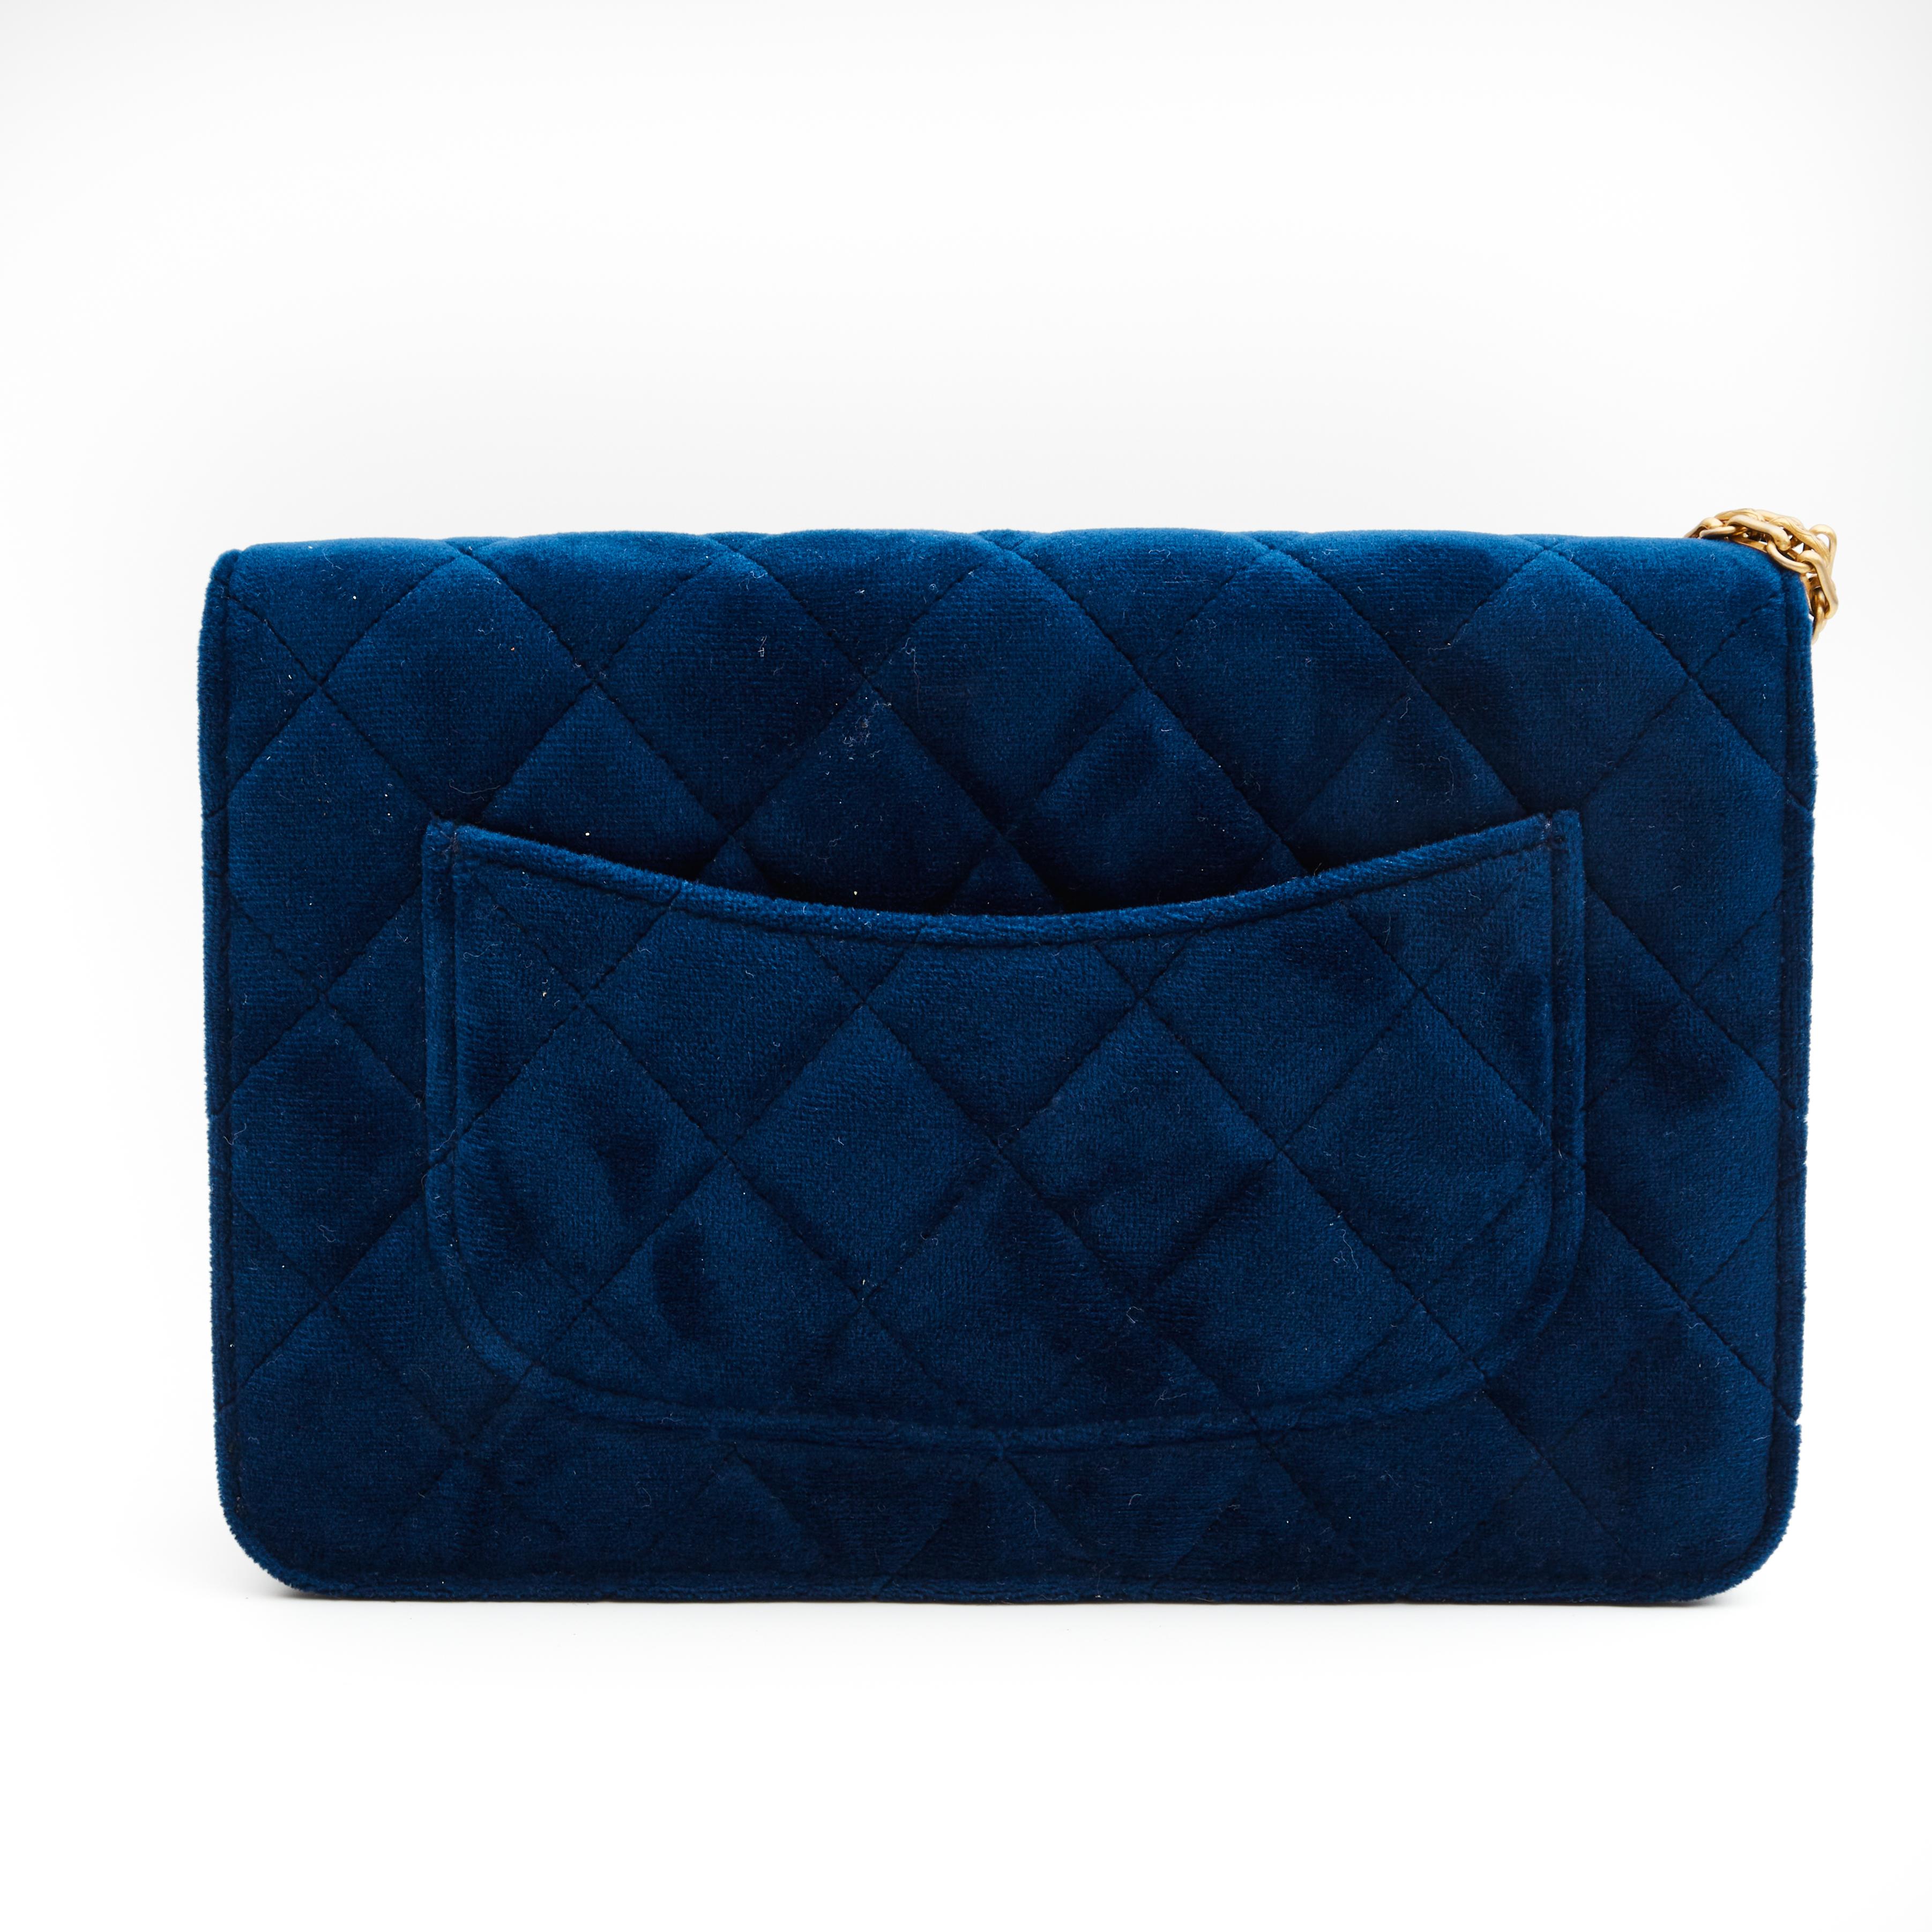 This wallet on a chain bag is made of diamond quilted velvet in blue. The bag features an aged gold bijoux chain shoulder strap, a squared Mademoiselle turn lock closure and a blue leather interior with a zip pocket, slip pocket and many card slots.